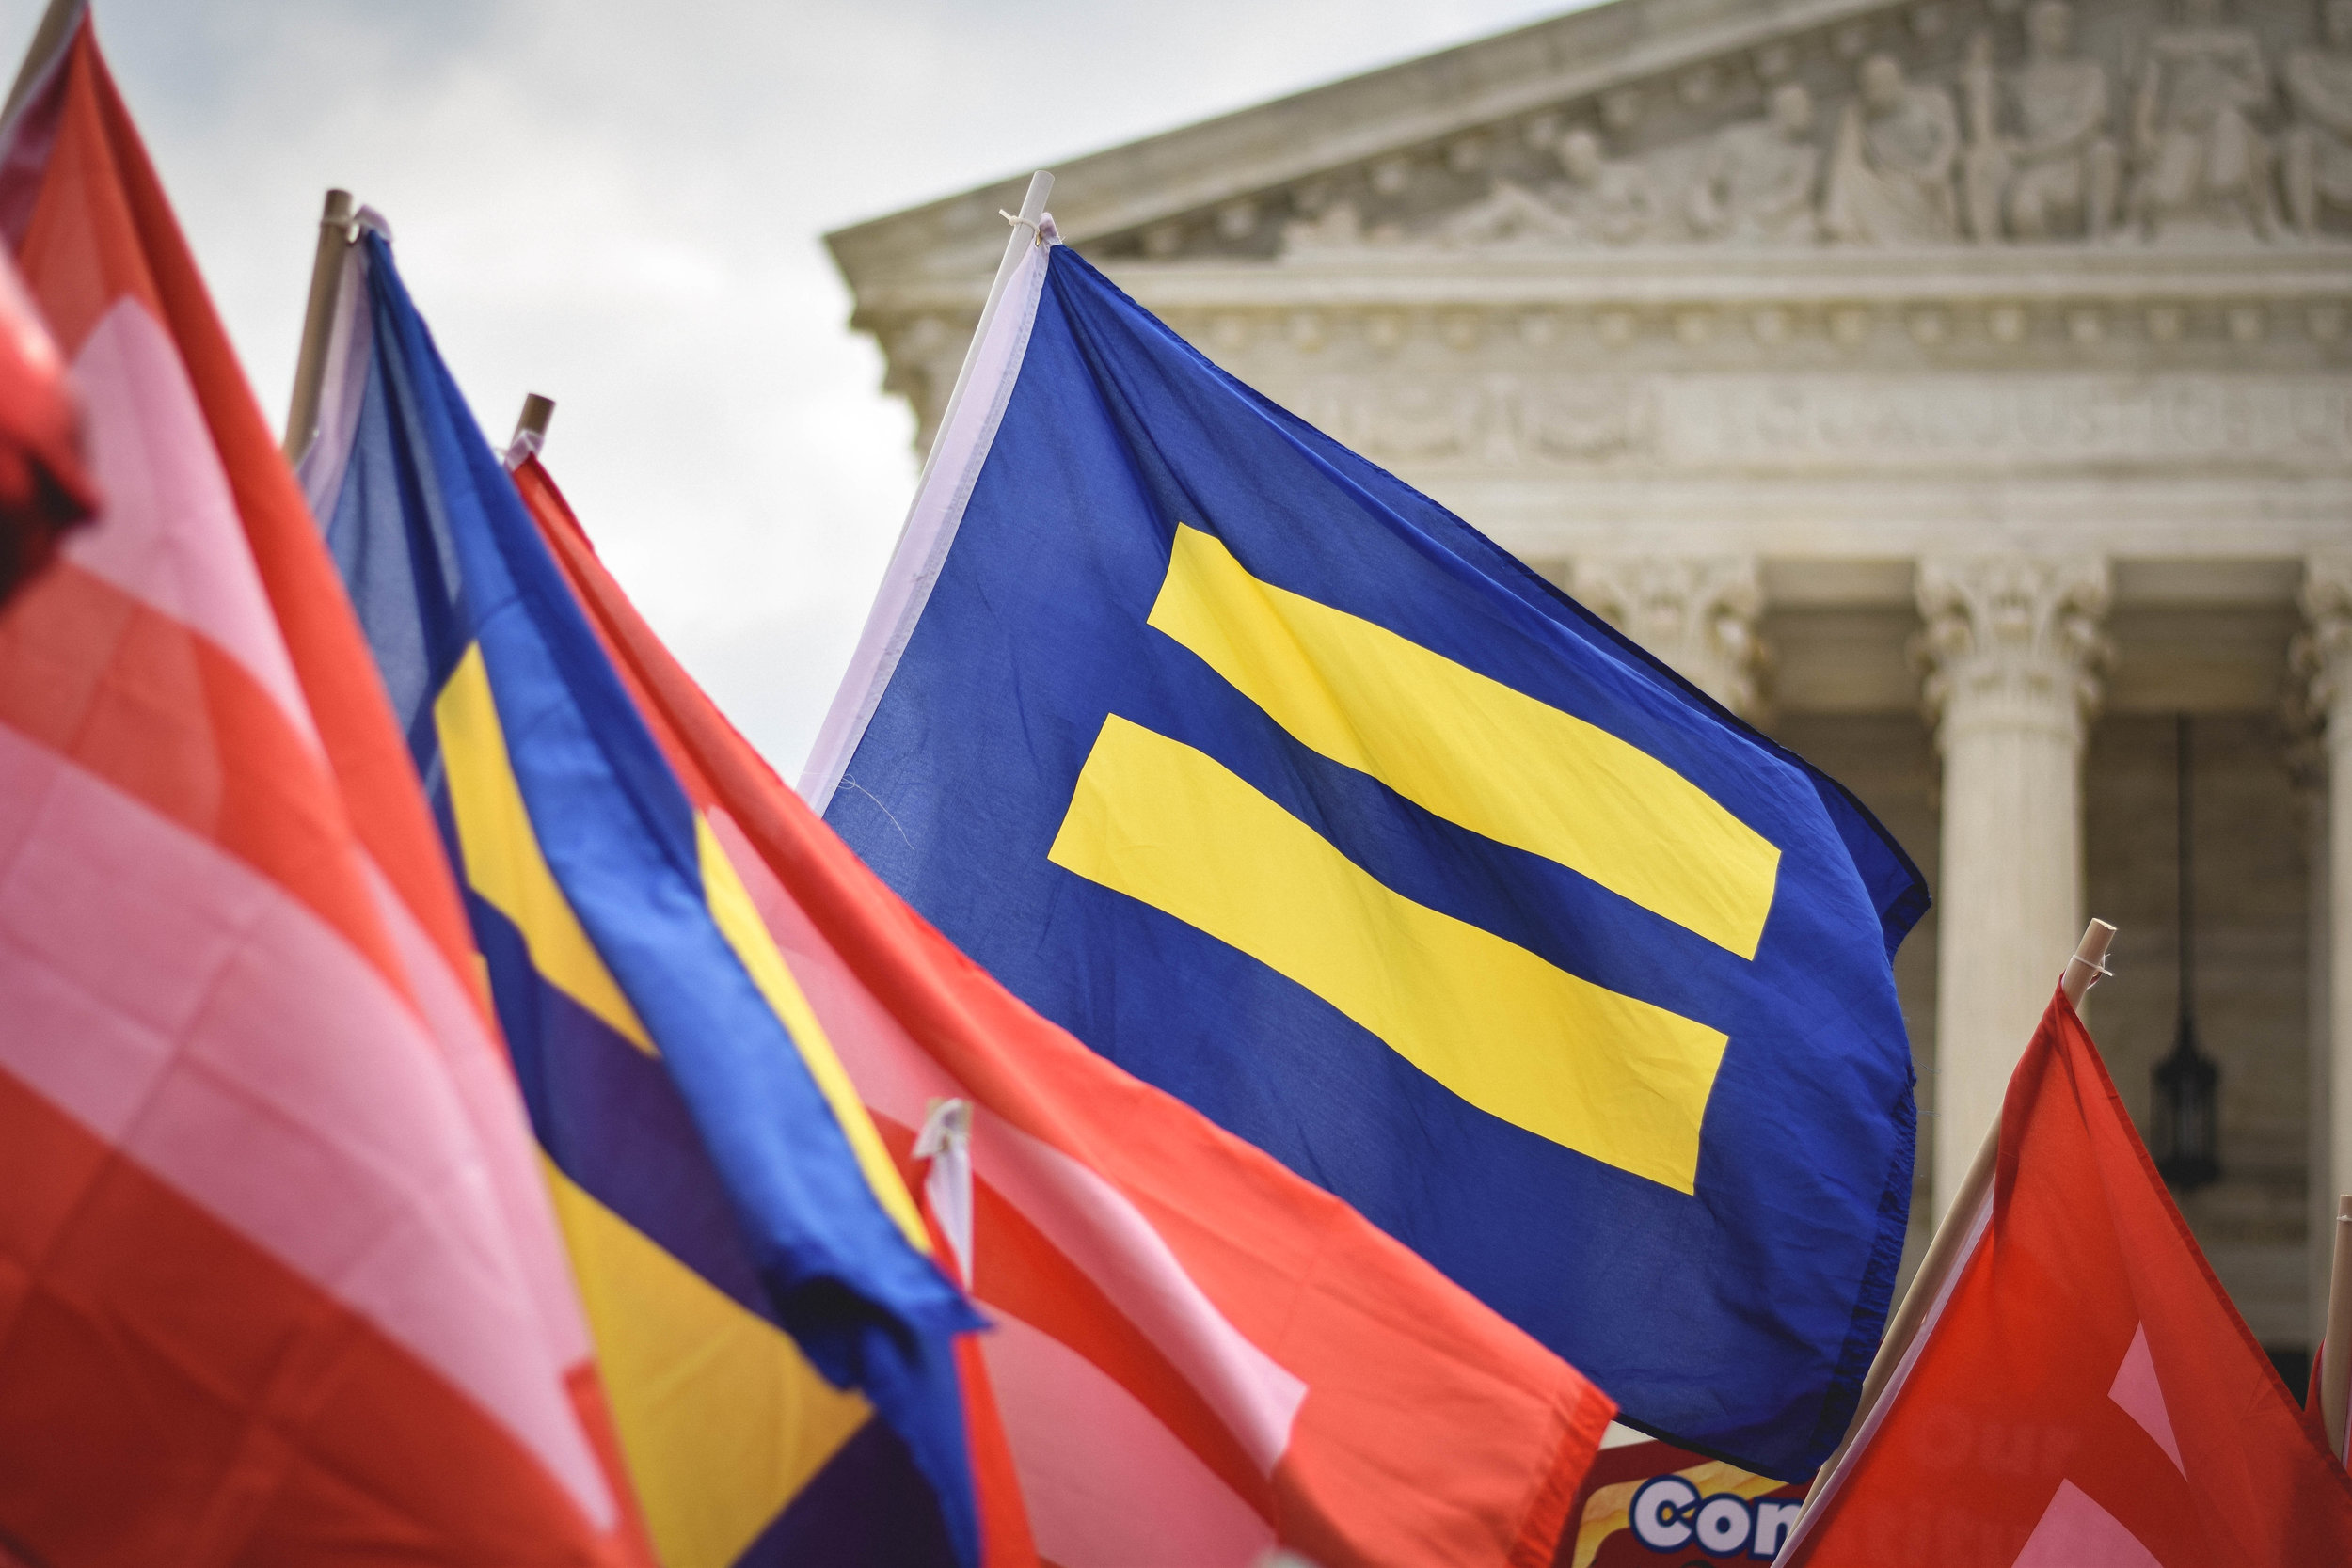 Featured image for “RFI, Islamic Scholars File Brief in Supreme Court on Sexual Orientation and Gender Identity”